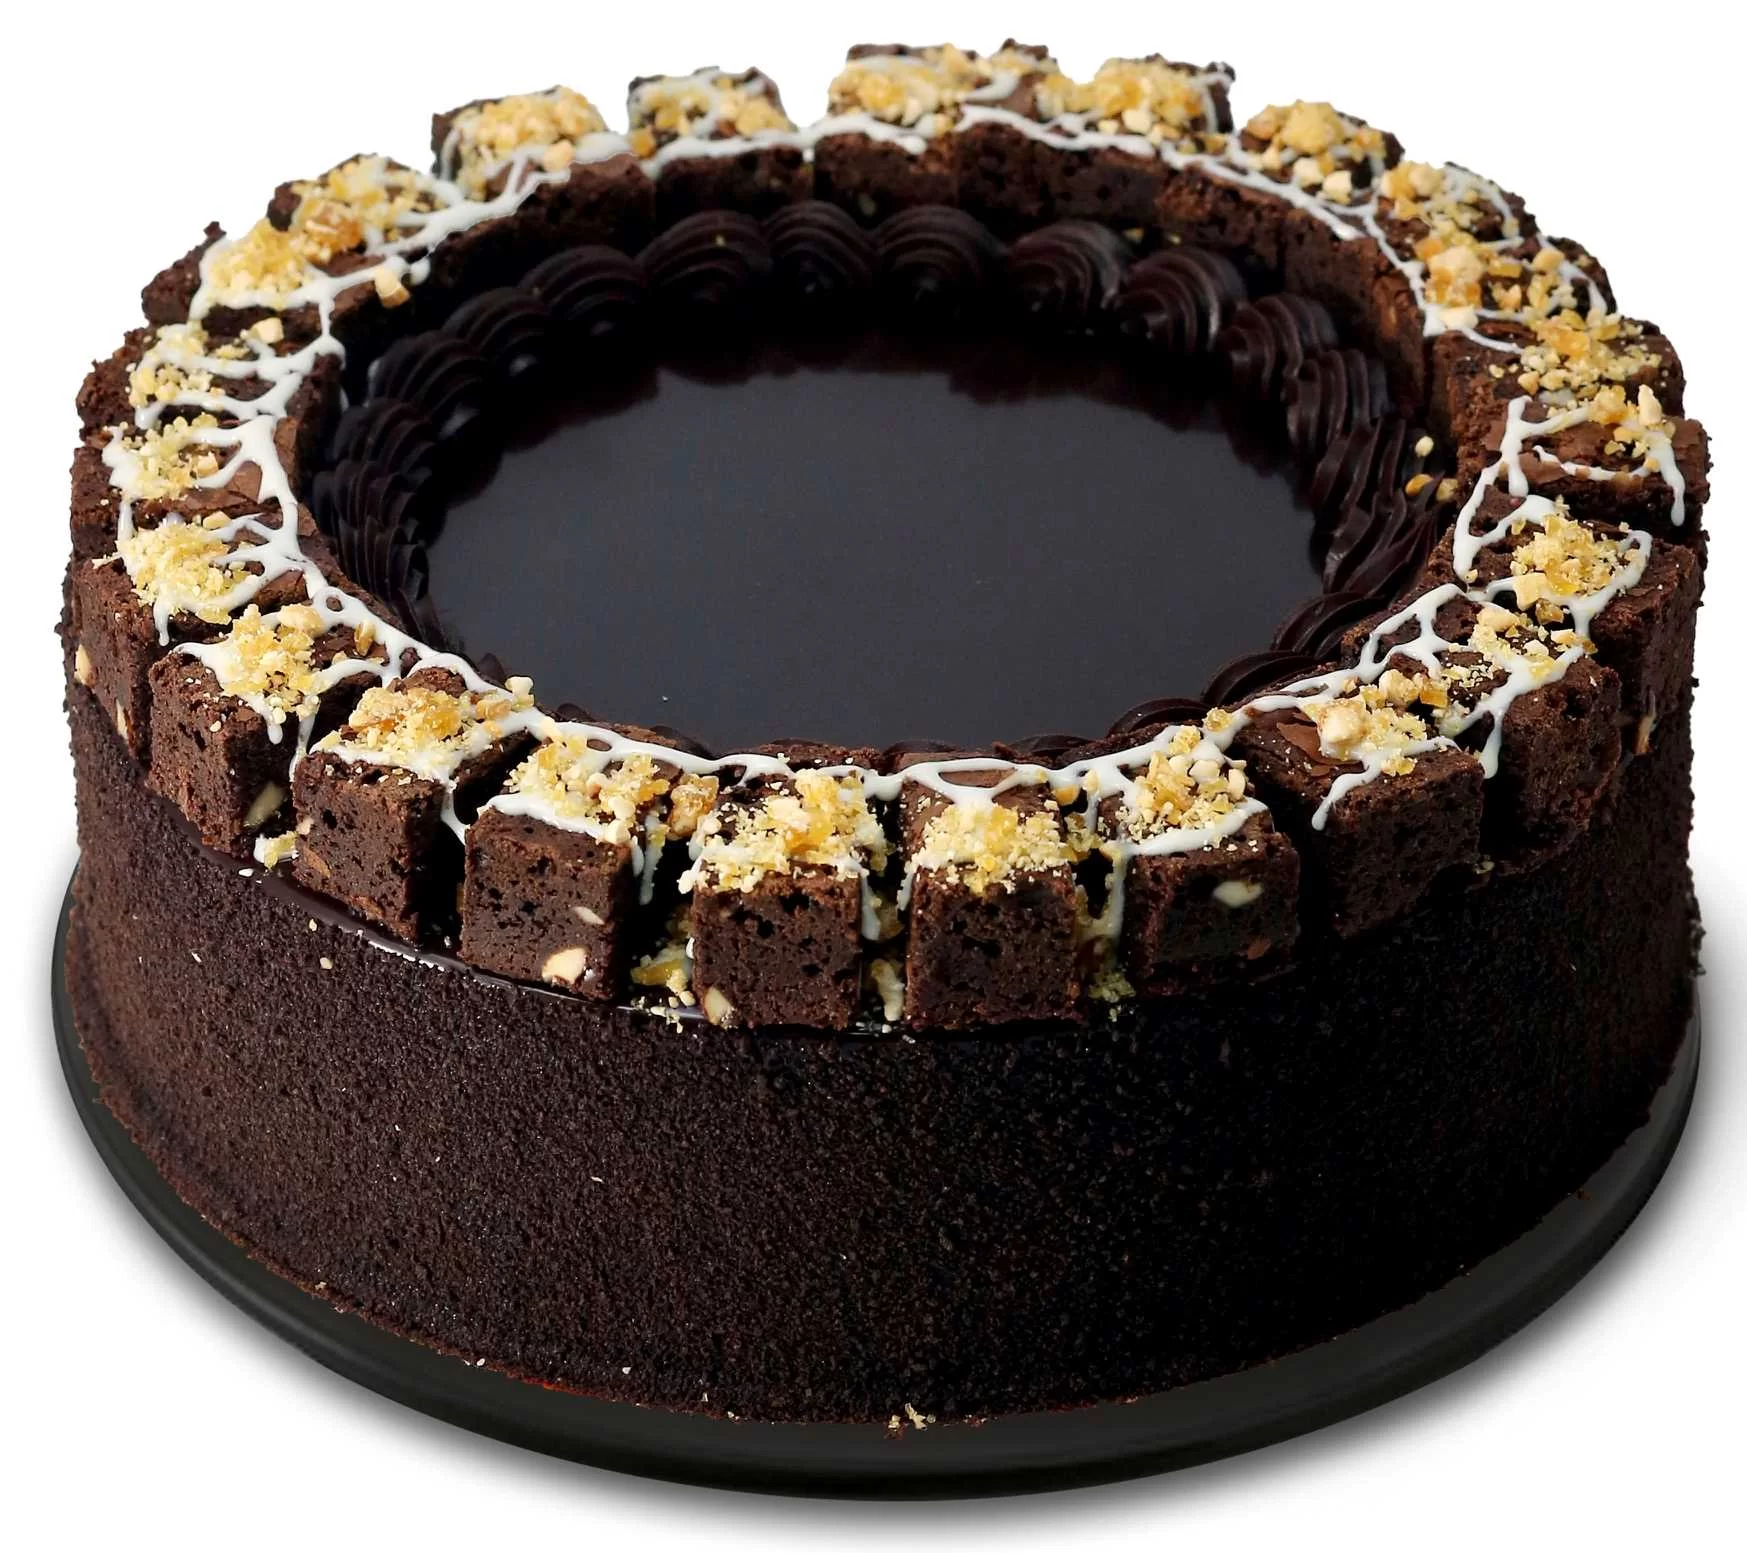 Order Eggless Dutch Truffle Cake Online At Best Prices in India | Theobroma